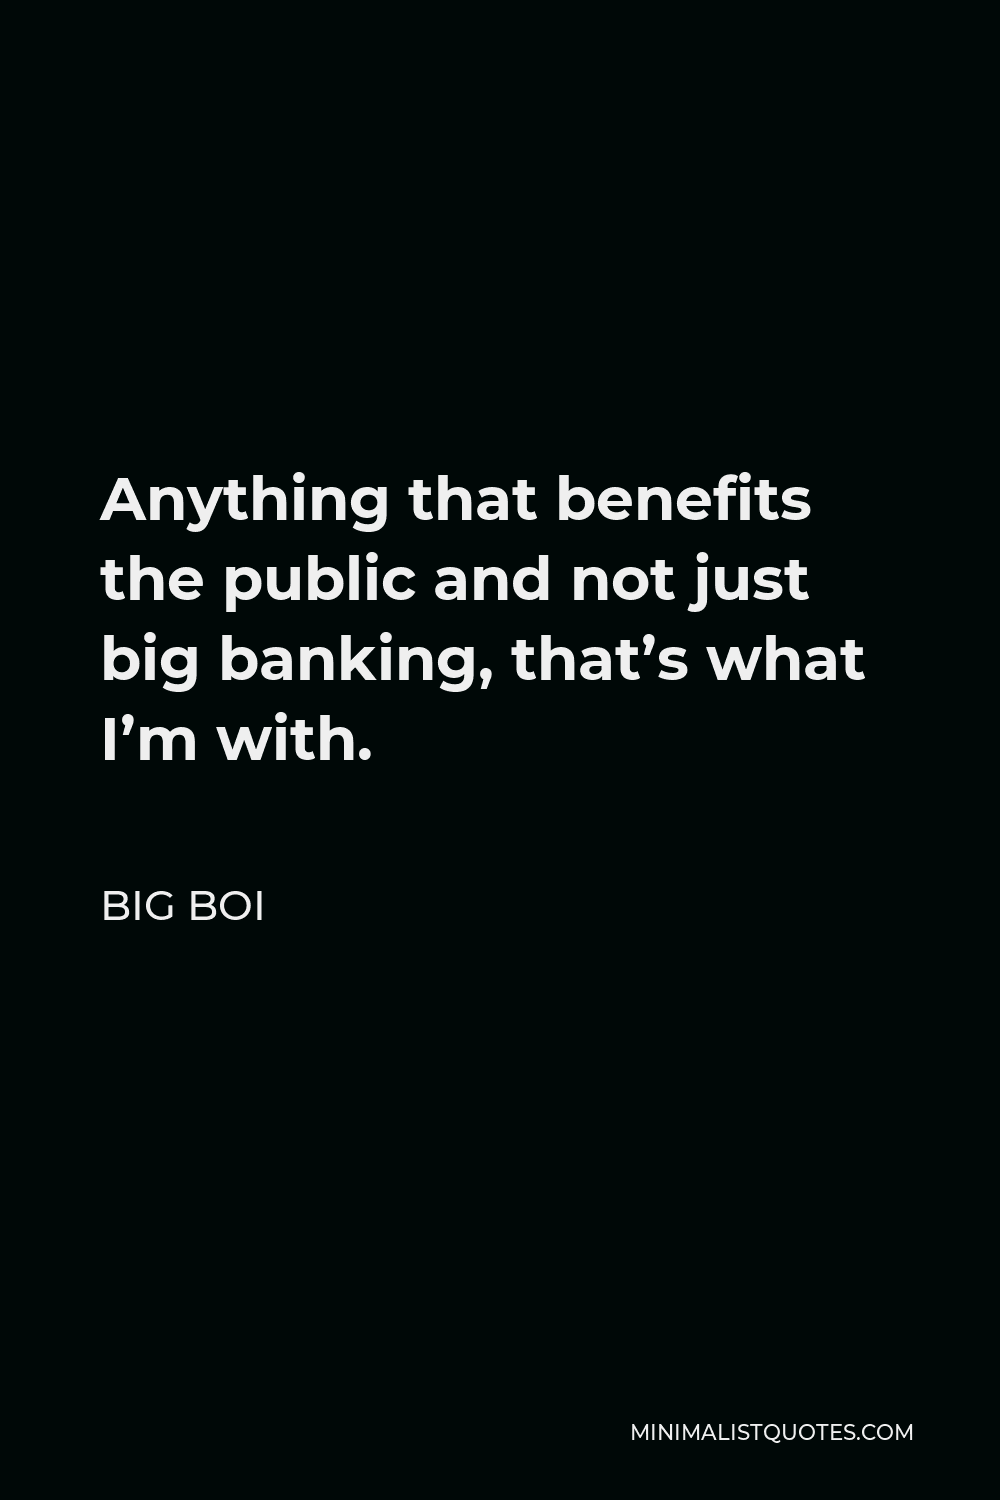 Big Boi Quote - Anything that benefits the public and not just big banking, that’s what I’m with.